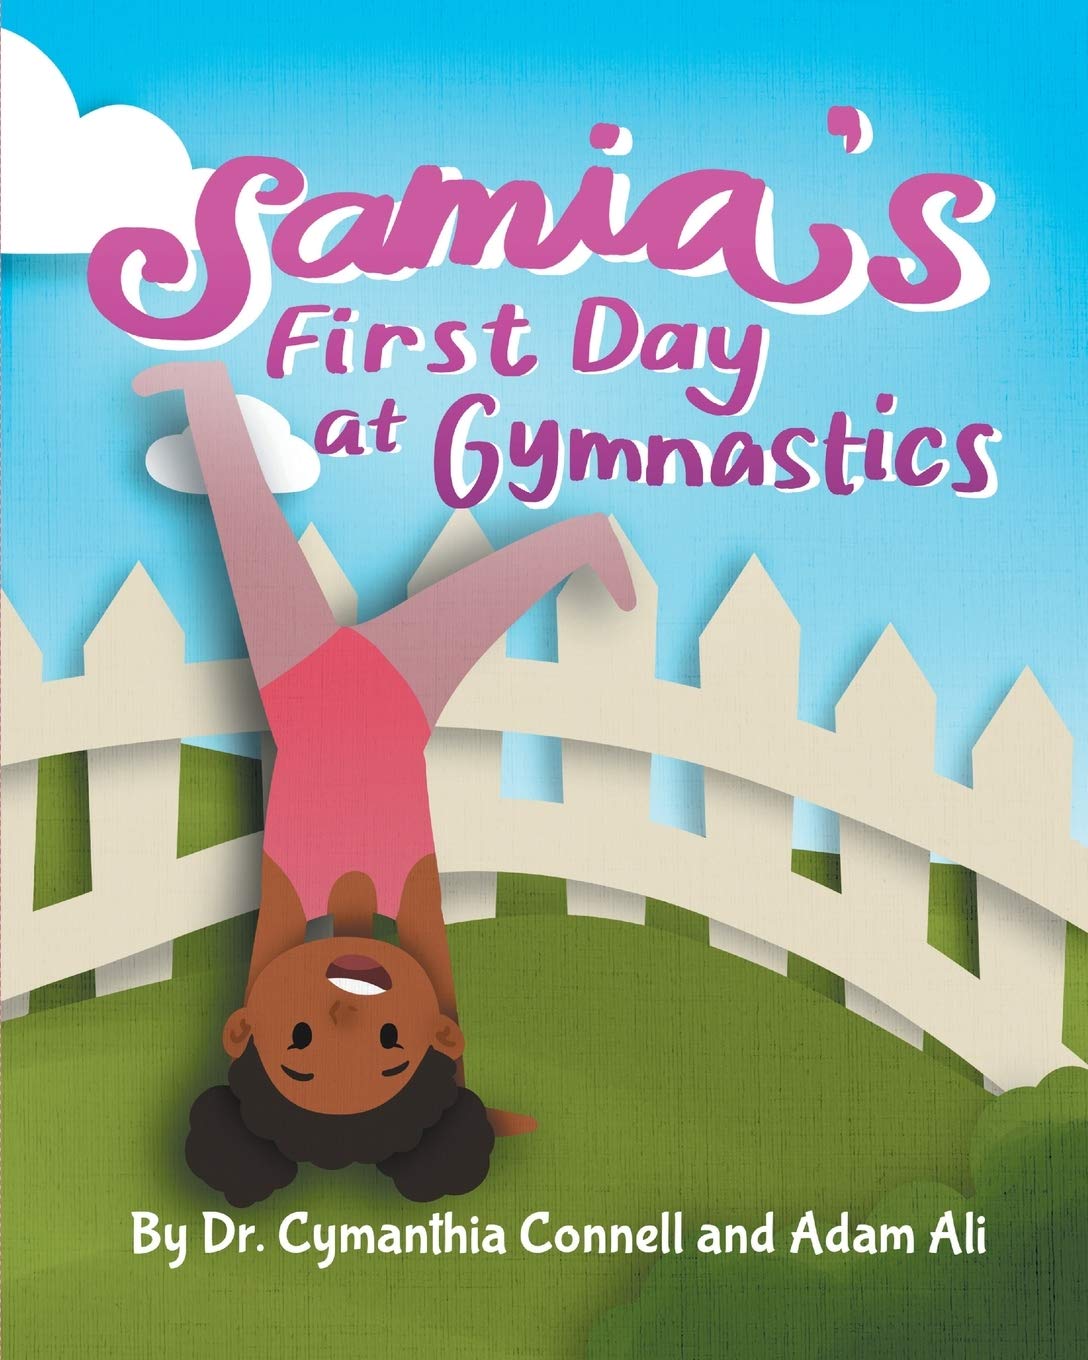 Samia's First Day at Gymnastics Book Black-Owned